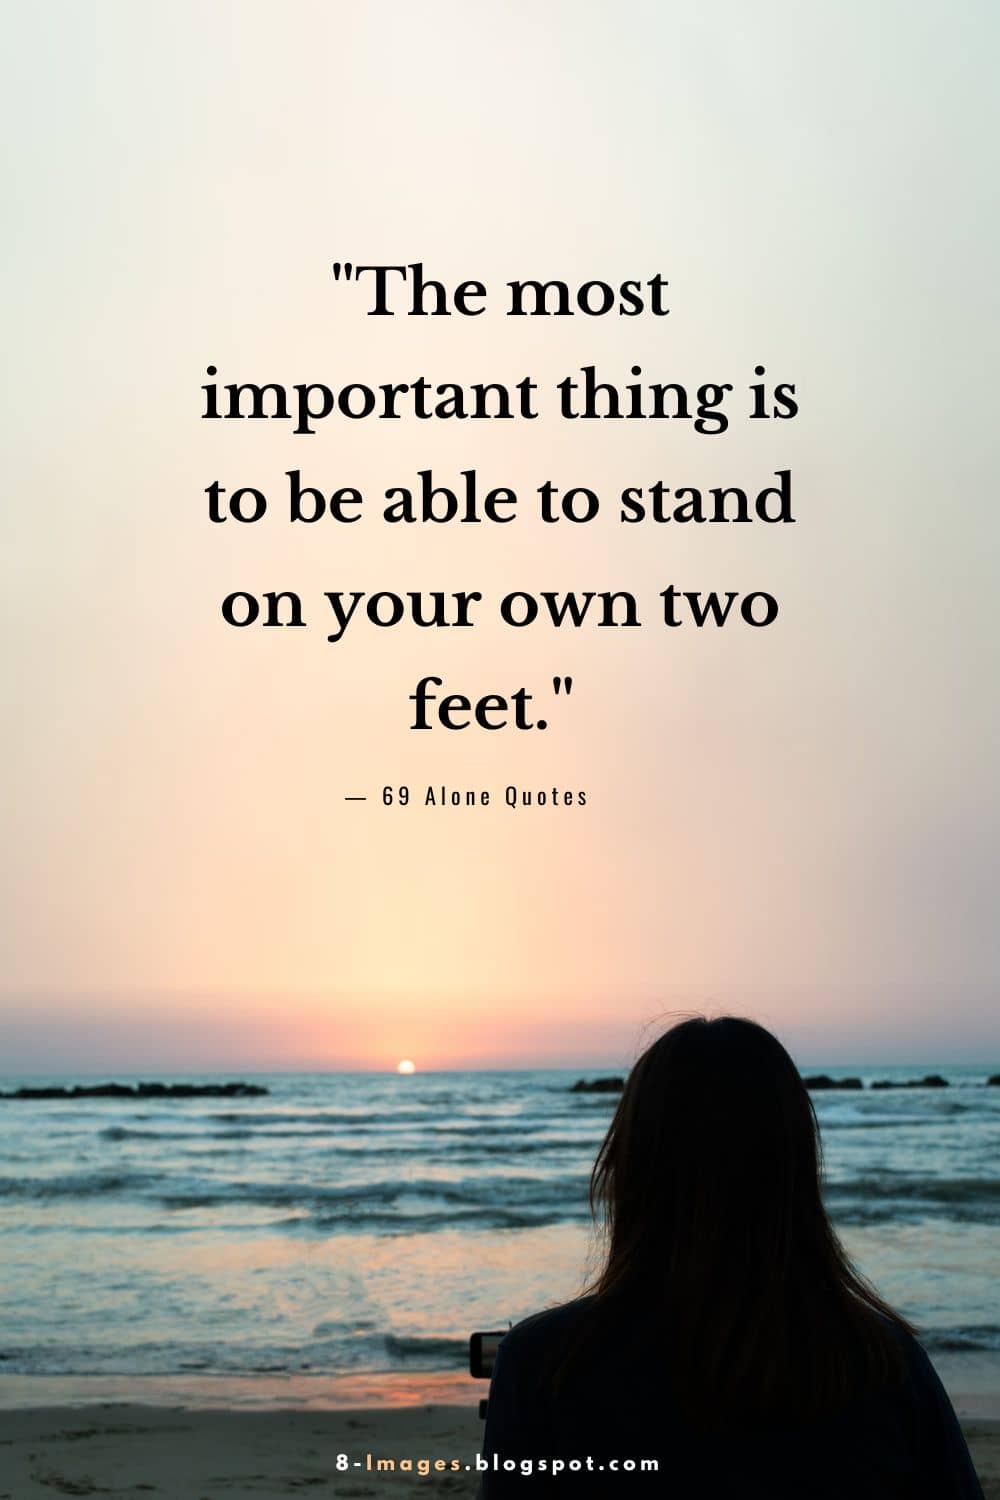 "The most important thing is to be able to stand on your own two feet." - Unknown